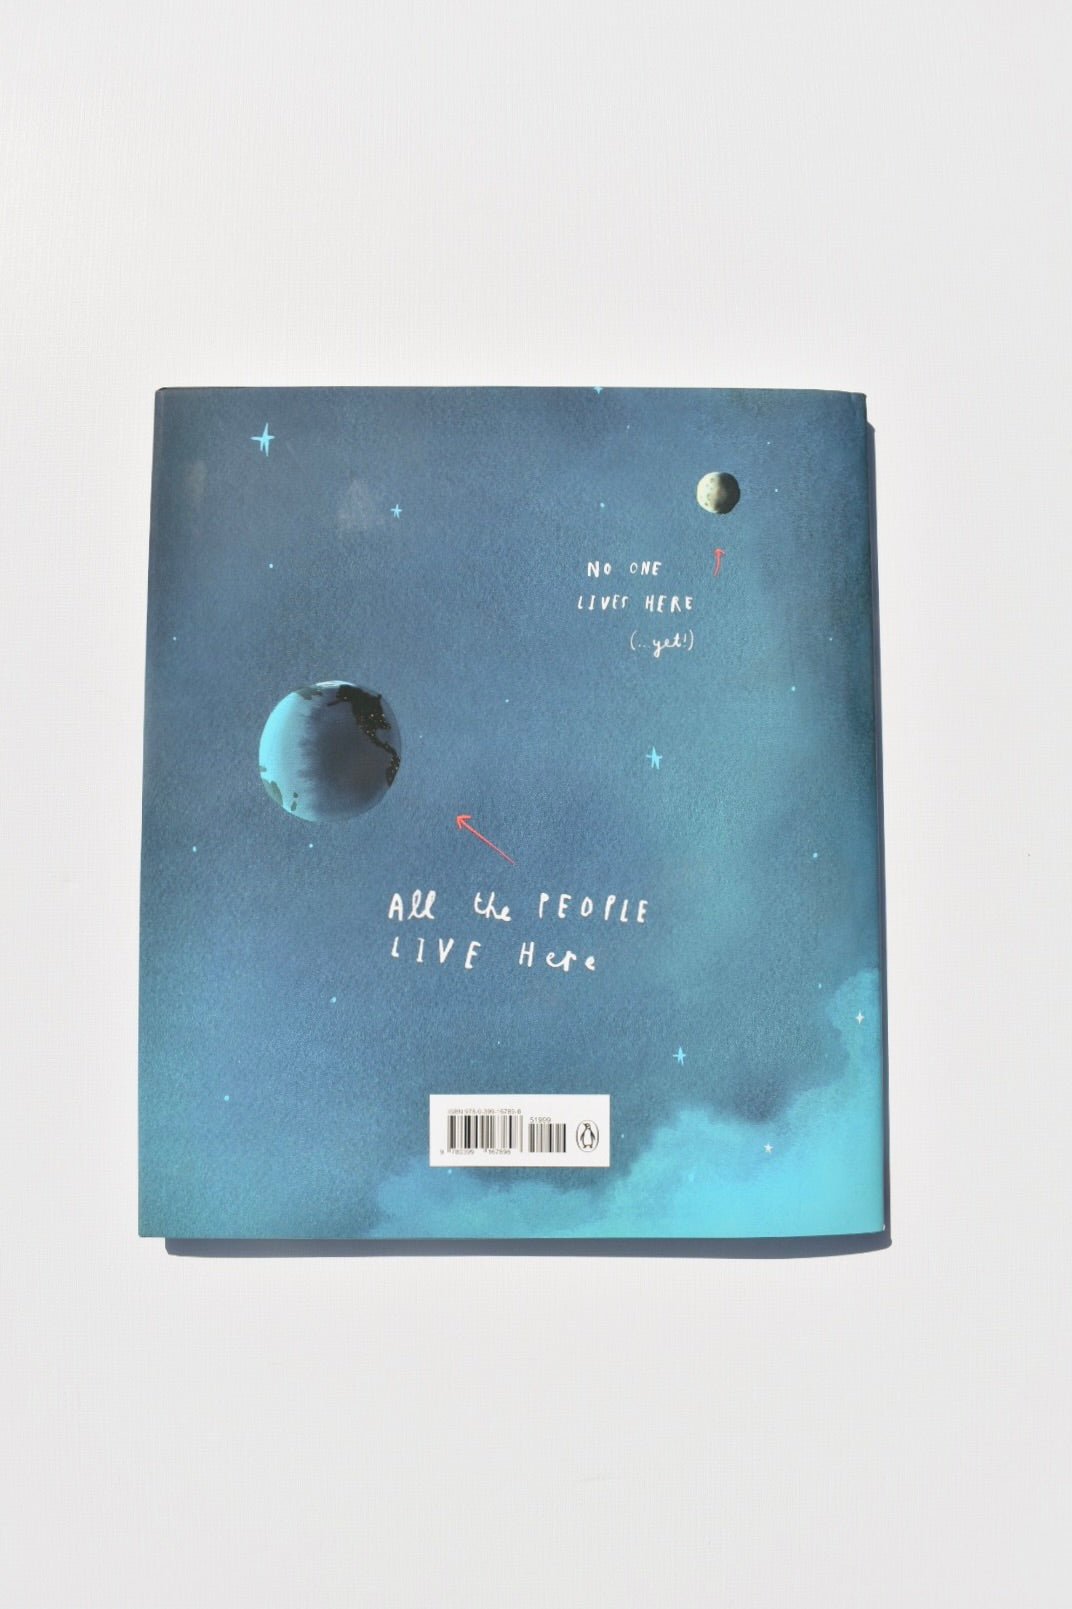 Here We Are - Ardent Market - Oliver Jeffers